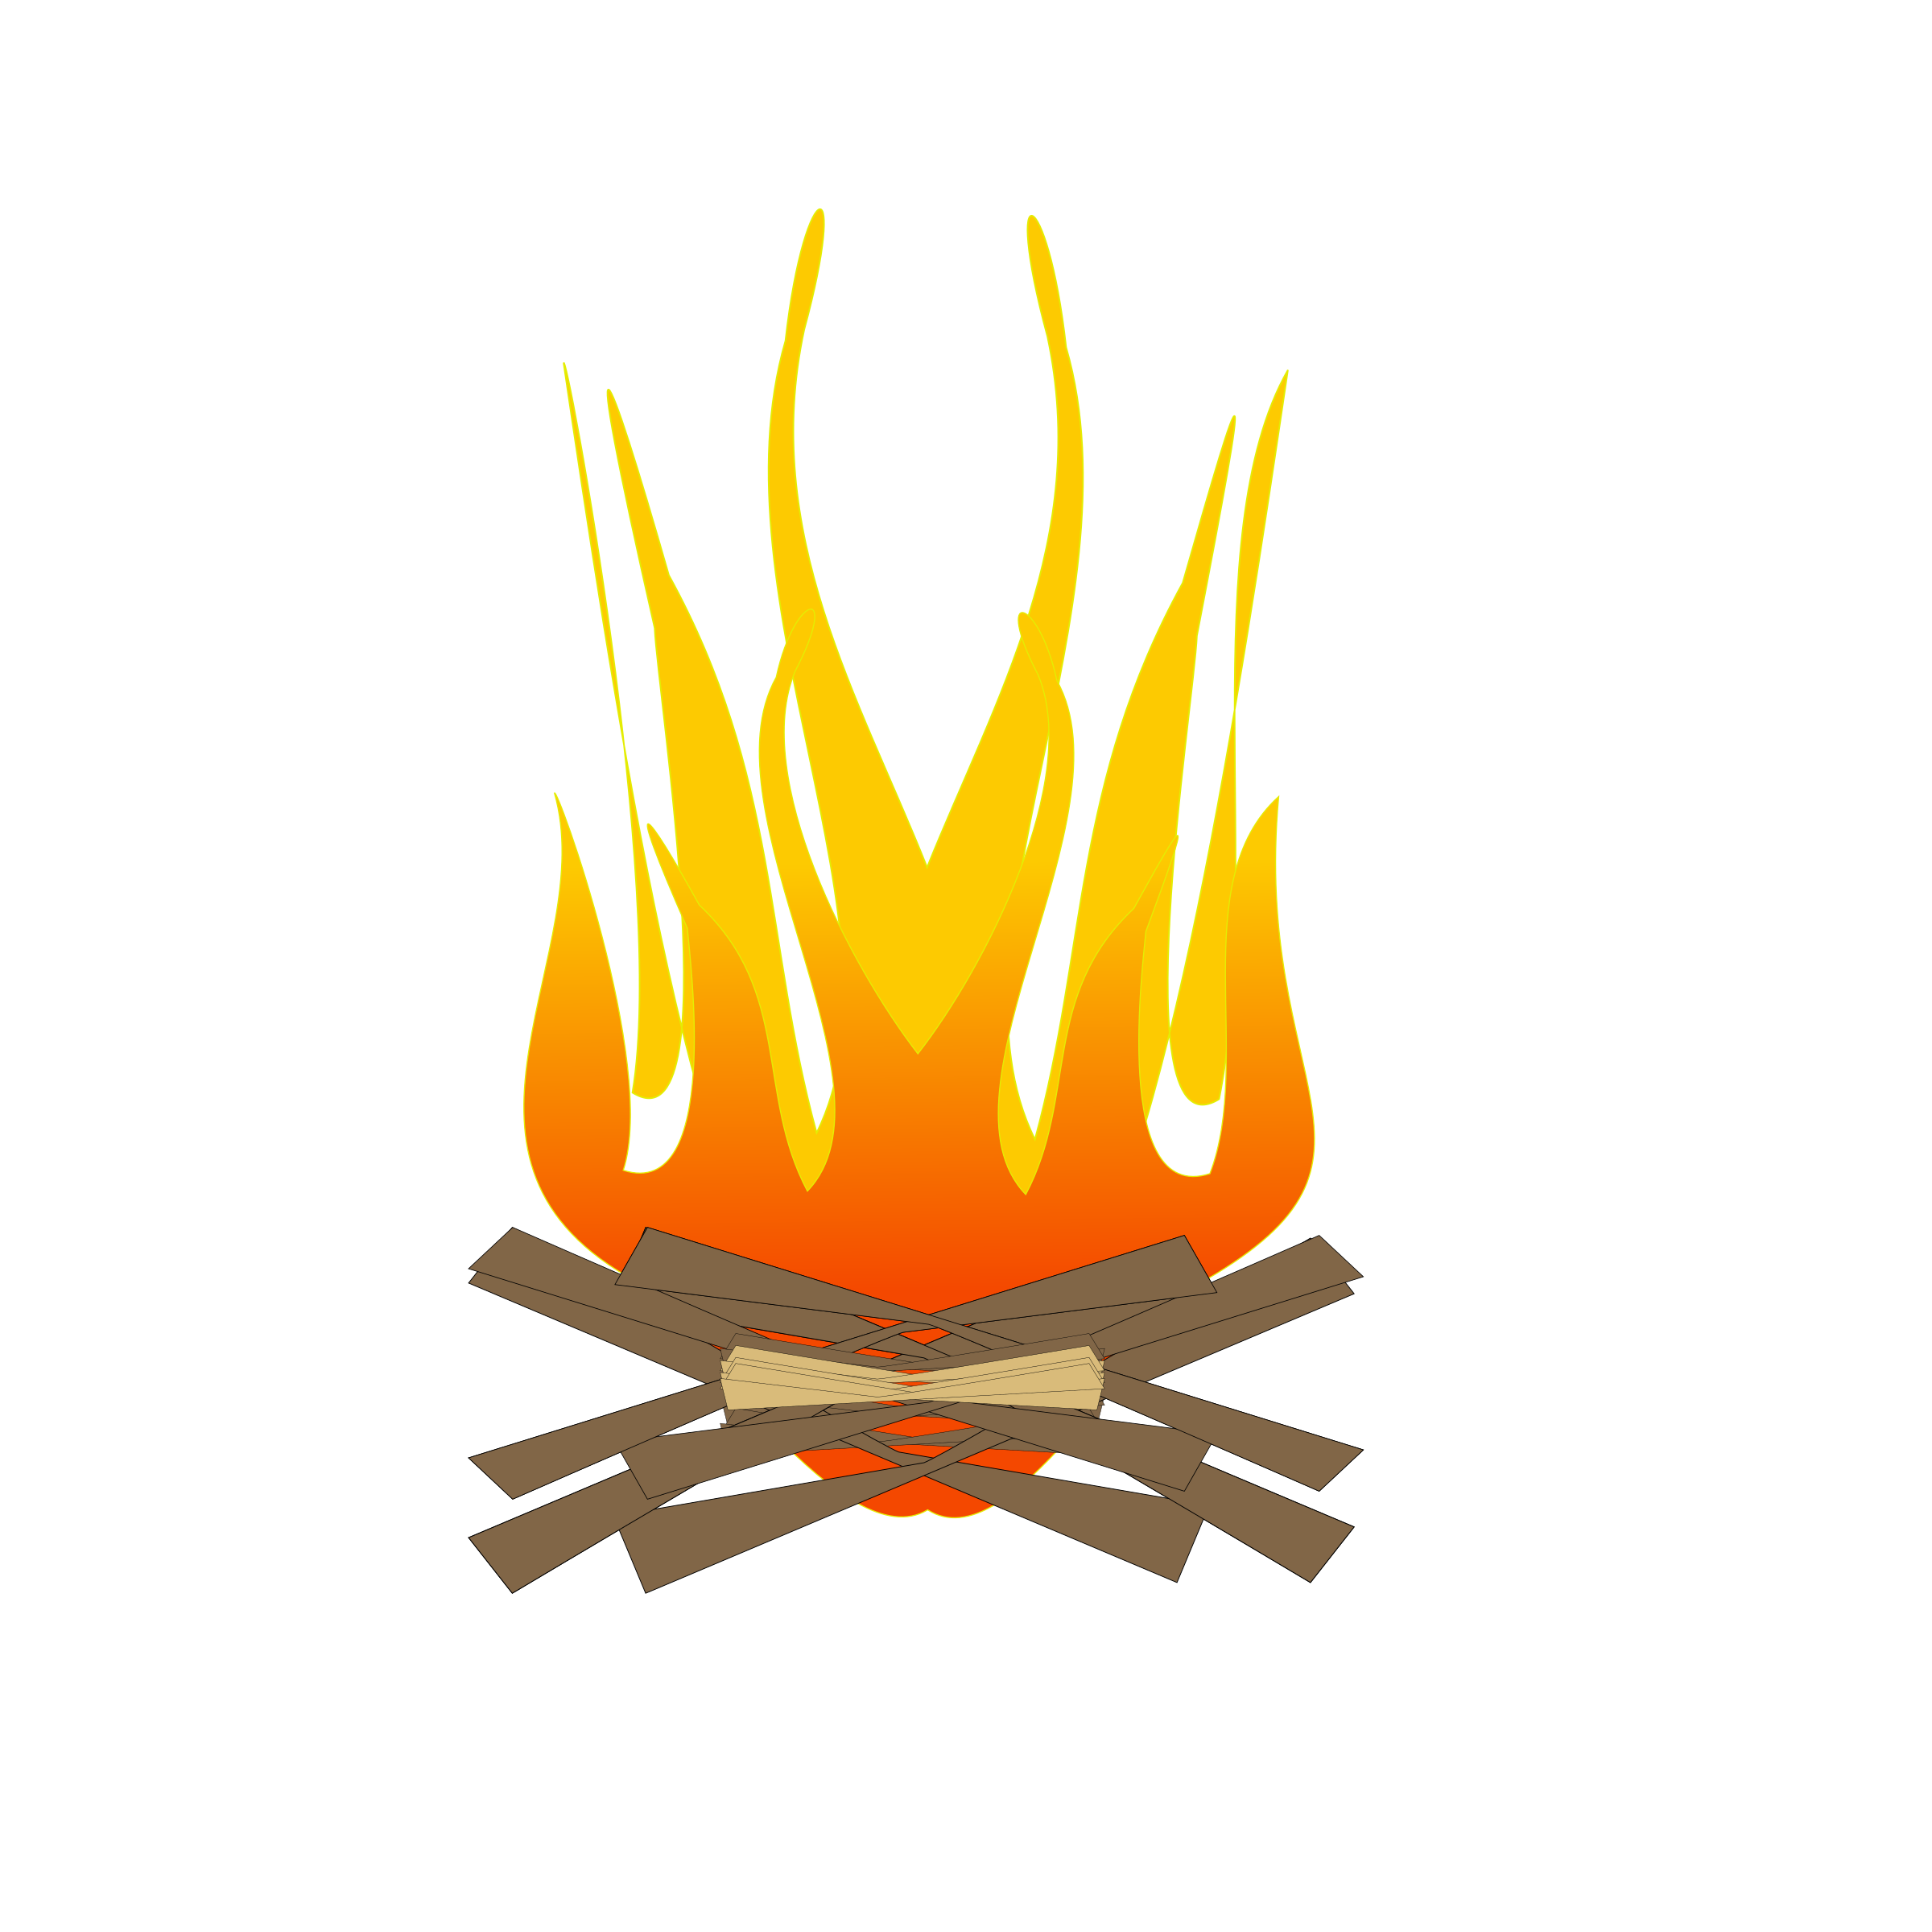 flames clipart yellow flame